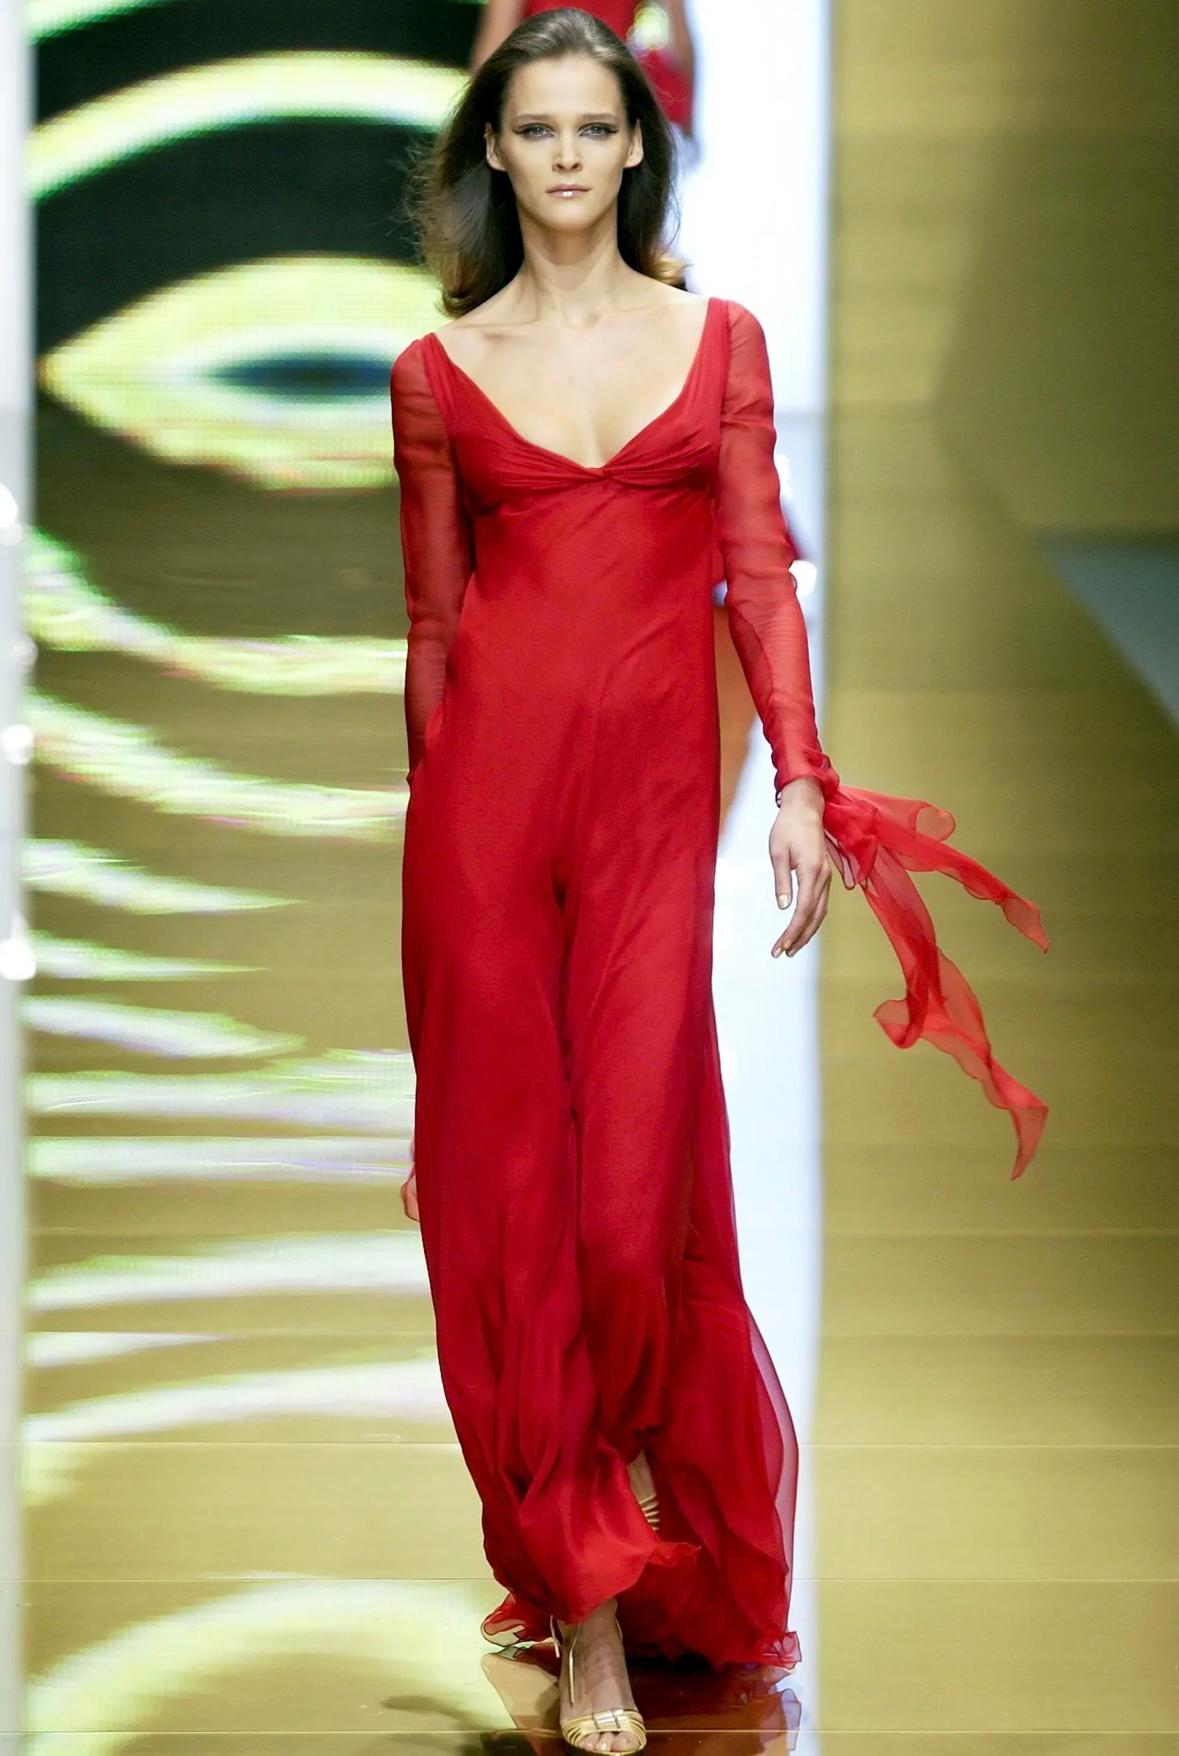 Presenting a striking chiffon evening gown designed by Valentino Garavani for his Fall/Winter 2002 collection. The dress debuted as the runway presentation's grand finale on Carmen Kass. Glamorous draped chiffon accents at the cuffs and back create